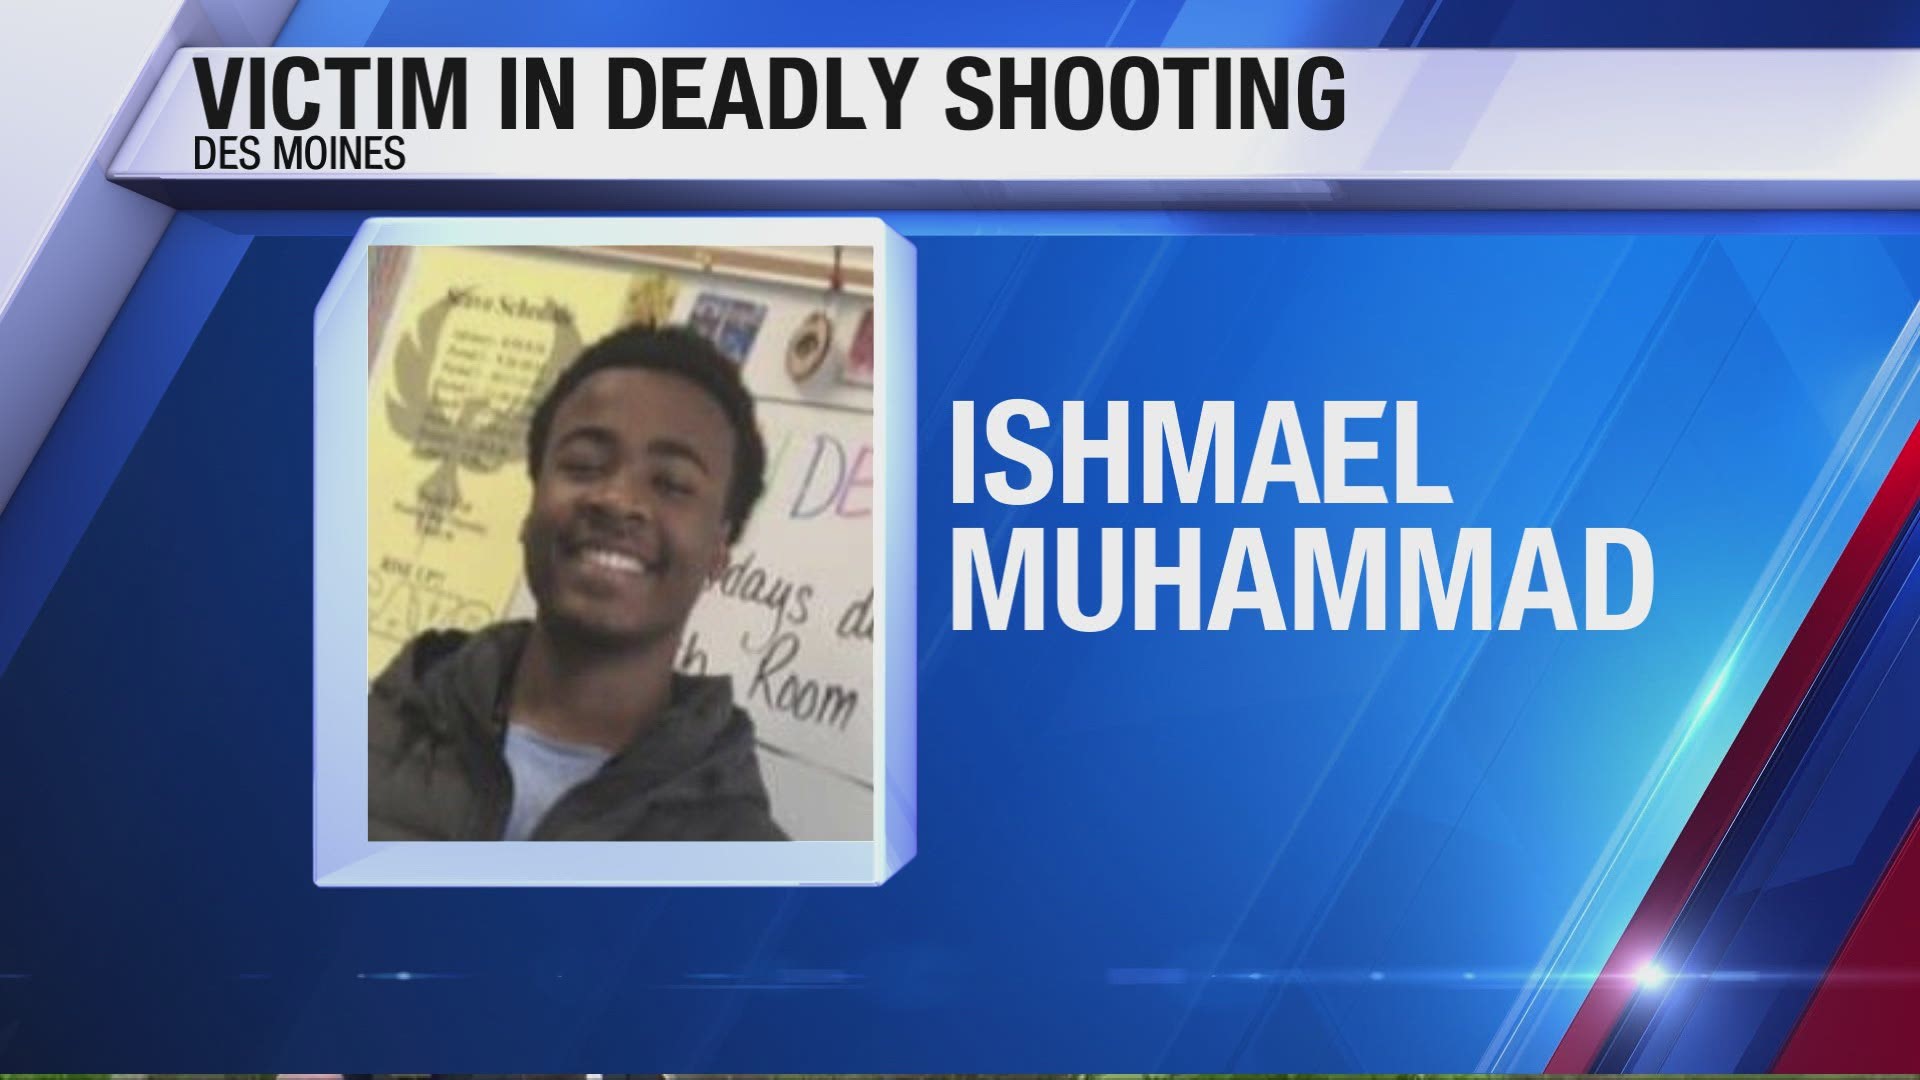 Ishmael Muhammad showed up to a house near Good Park with a gunshot wound to his neck. He later died in the hospital.